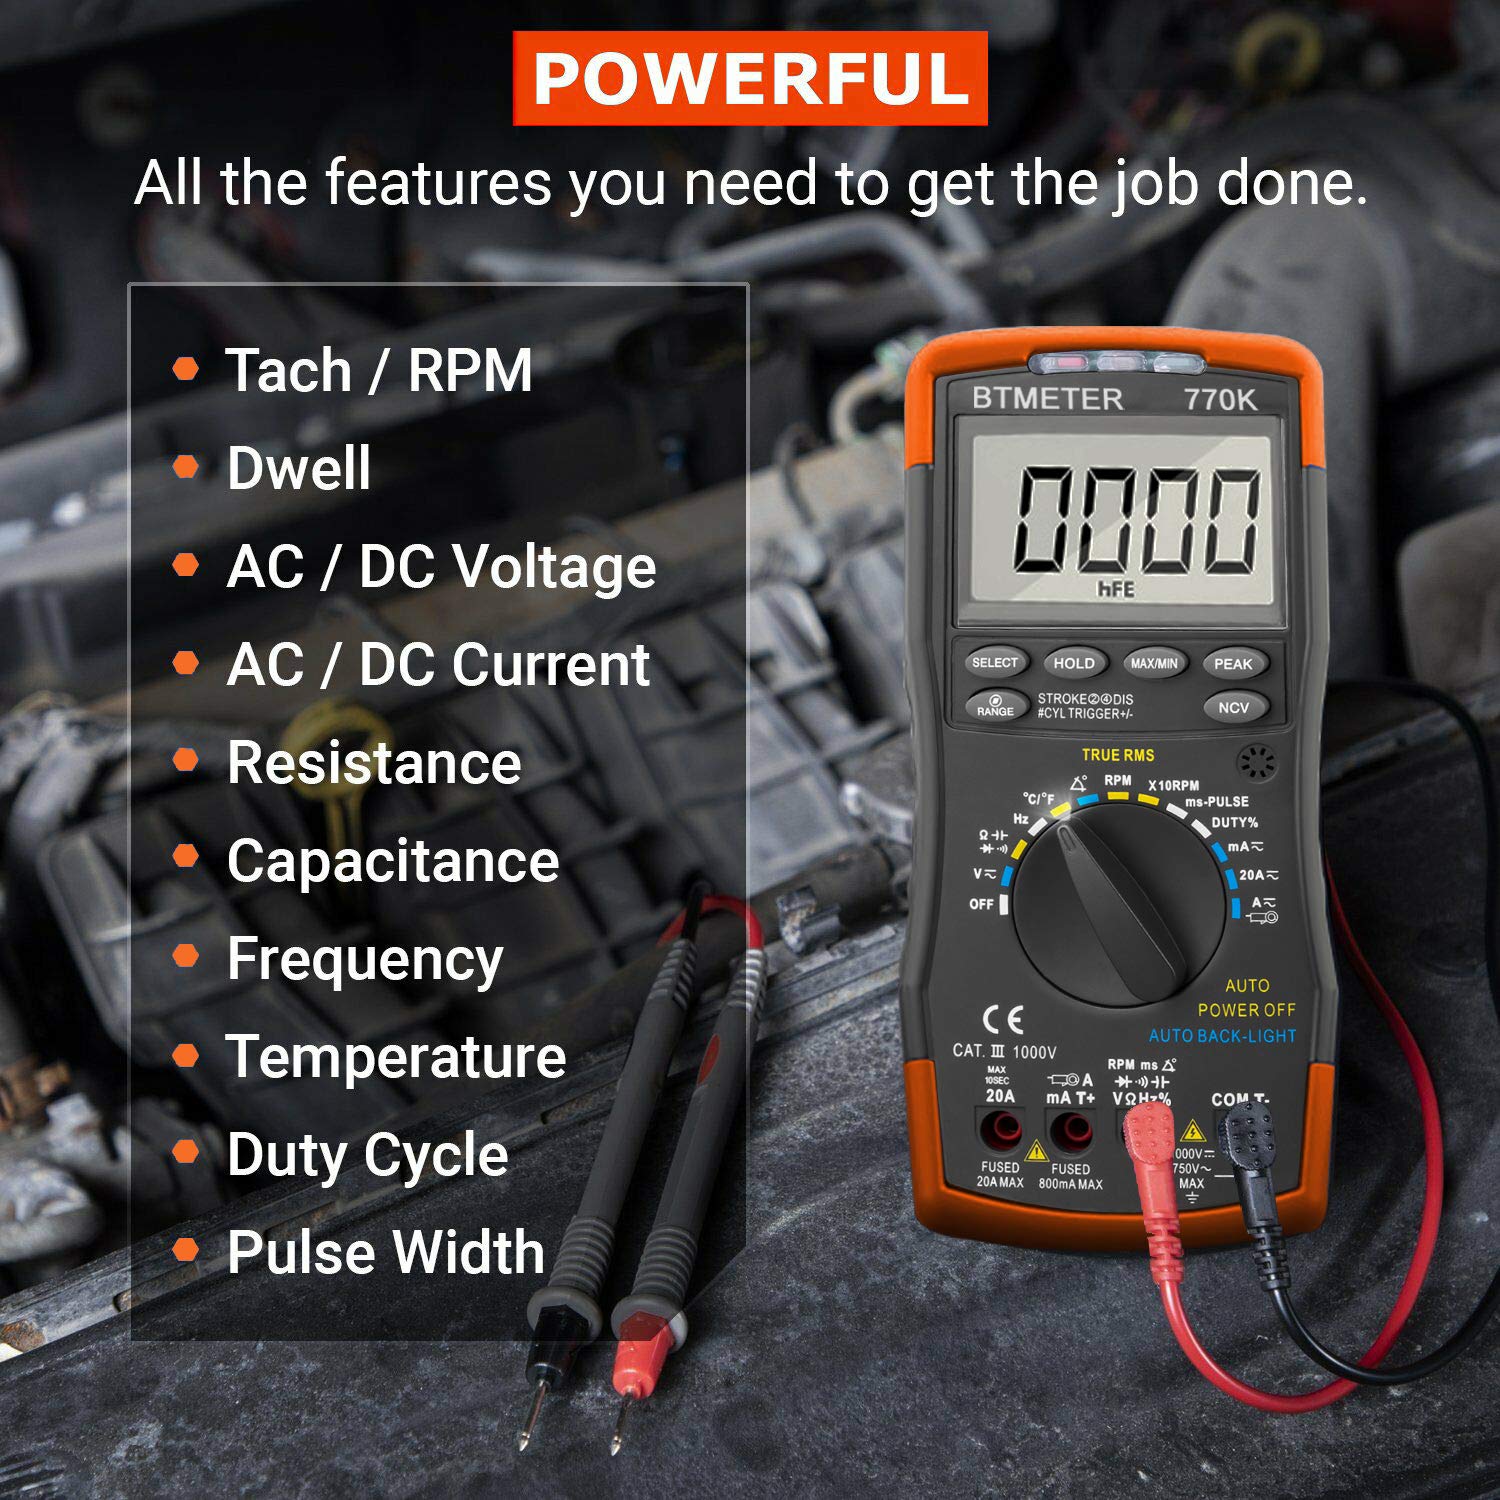 BTMETER BT-770K Auto Ranging Automotive Multimeter for Dwell Angle Pulse Width Tach Temperature Duty Cycle Voltage Current Resistance Test